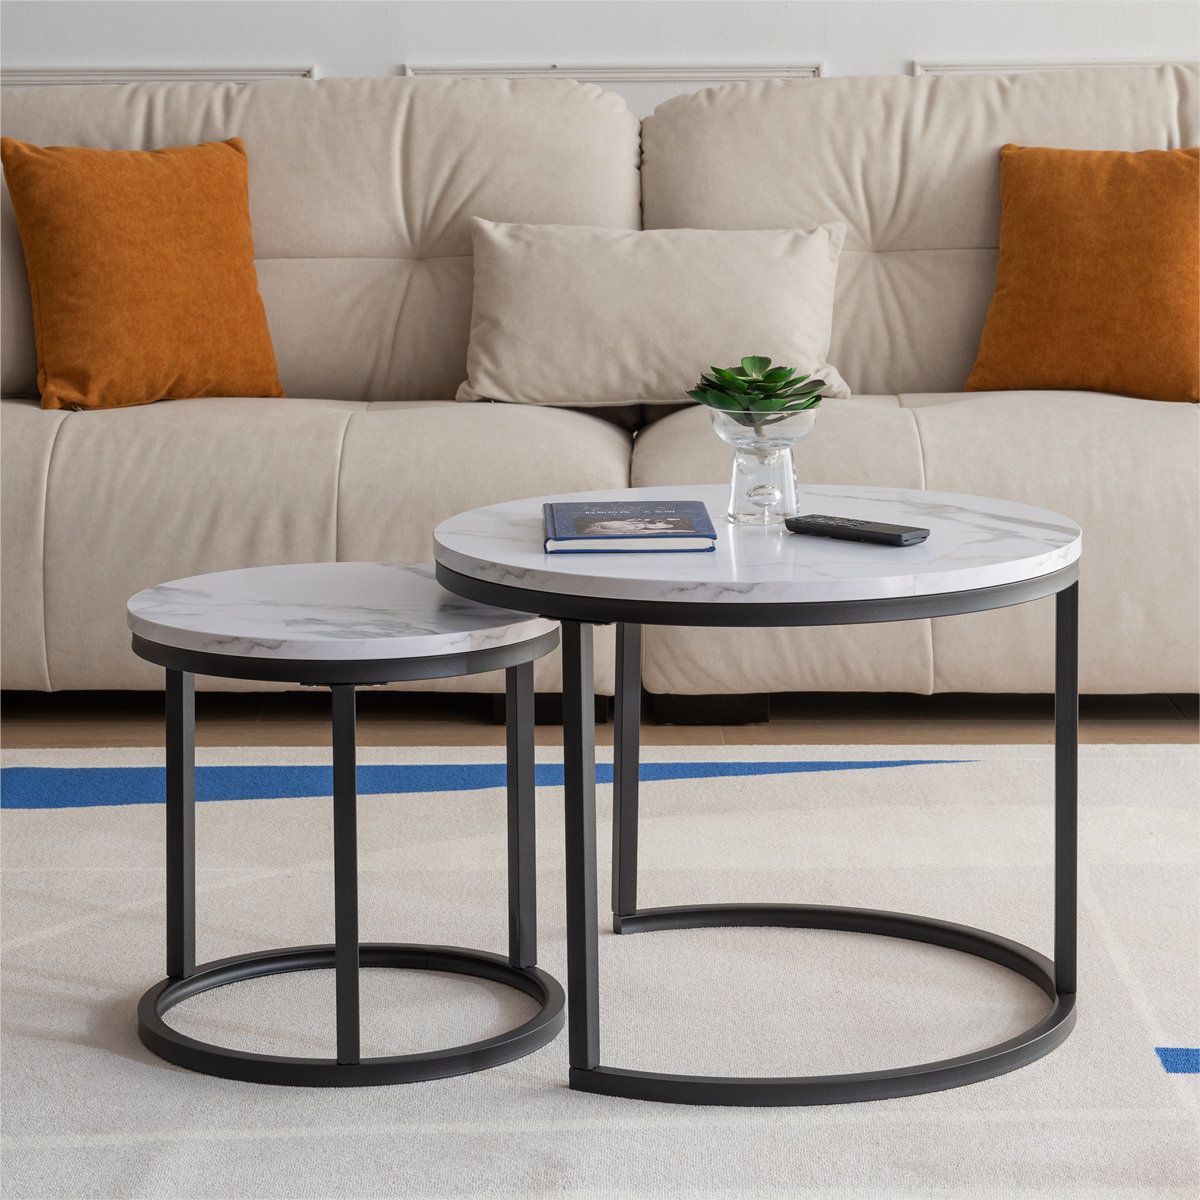 Wrought Studio Derell Nesting Coffee Table | Wayfair Regarding Modern Nesting Coffee Tables (View 10 of 15)